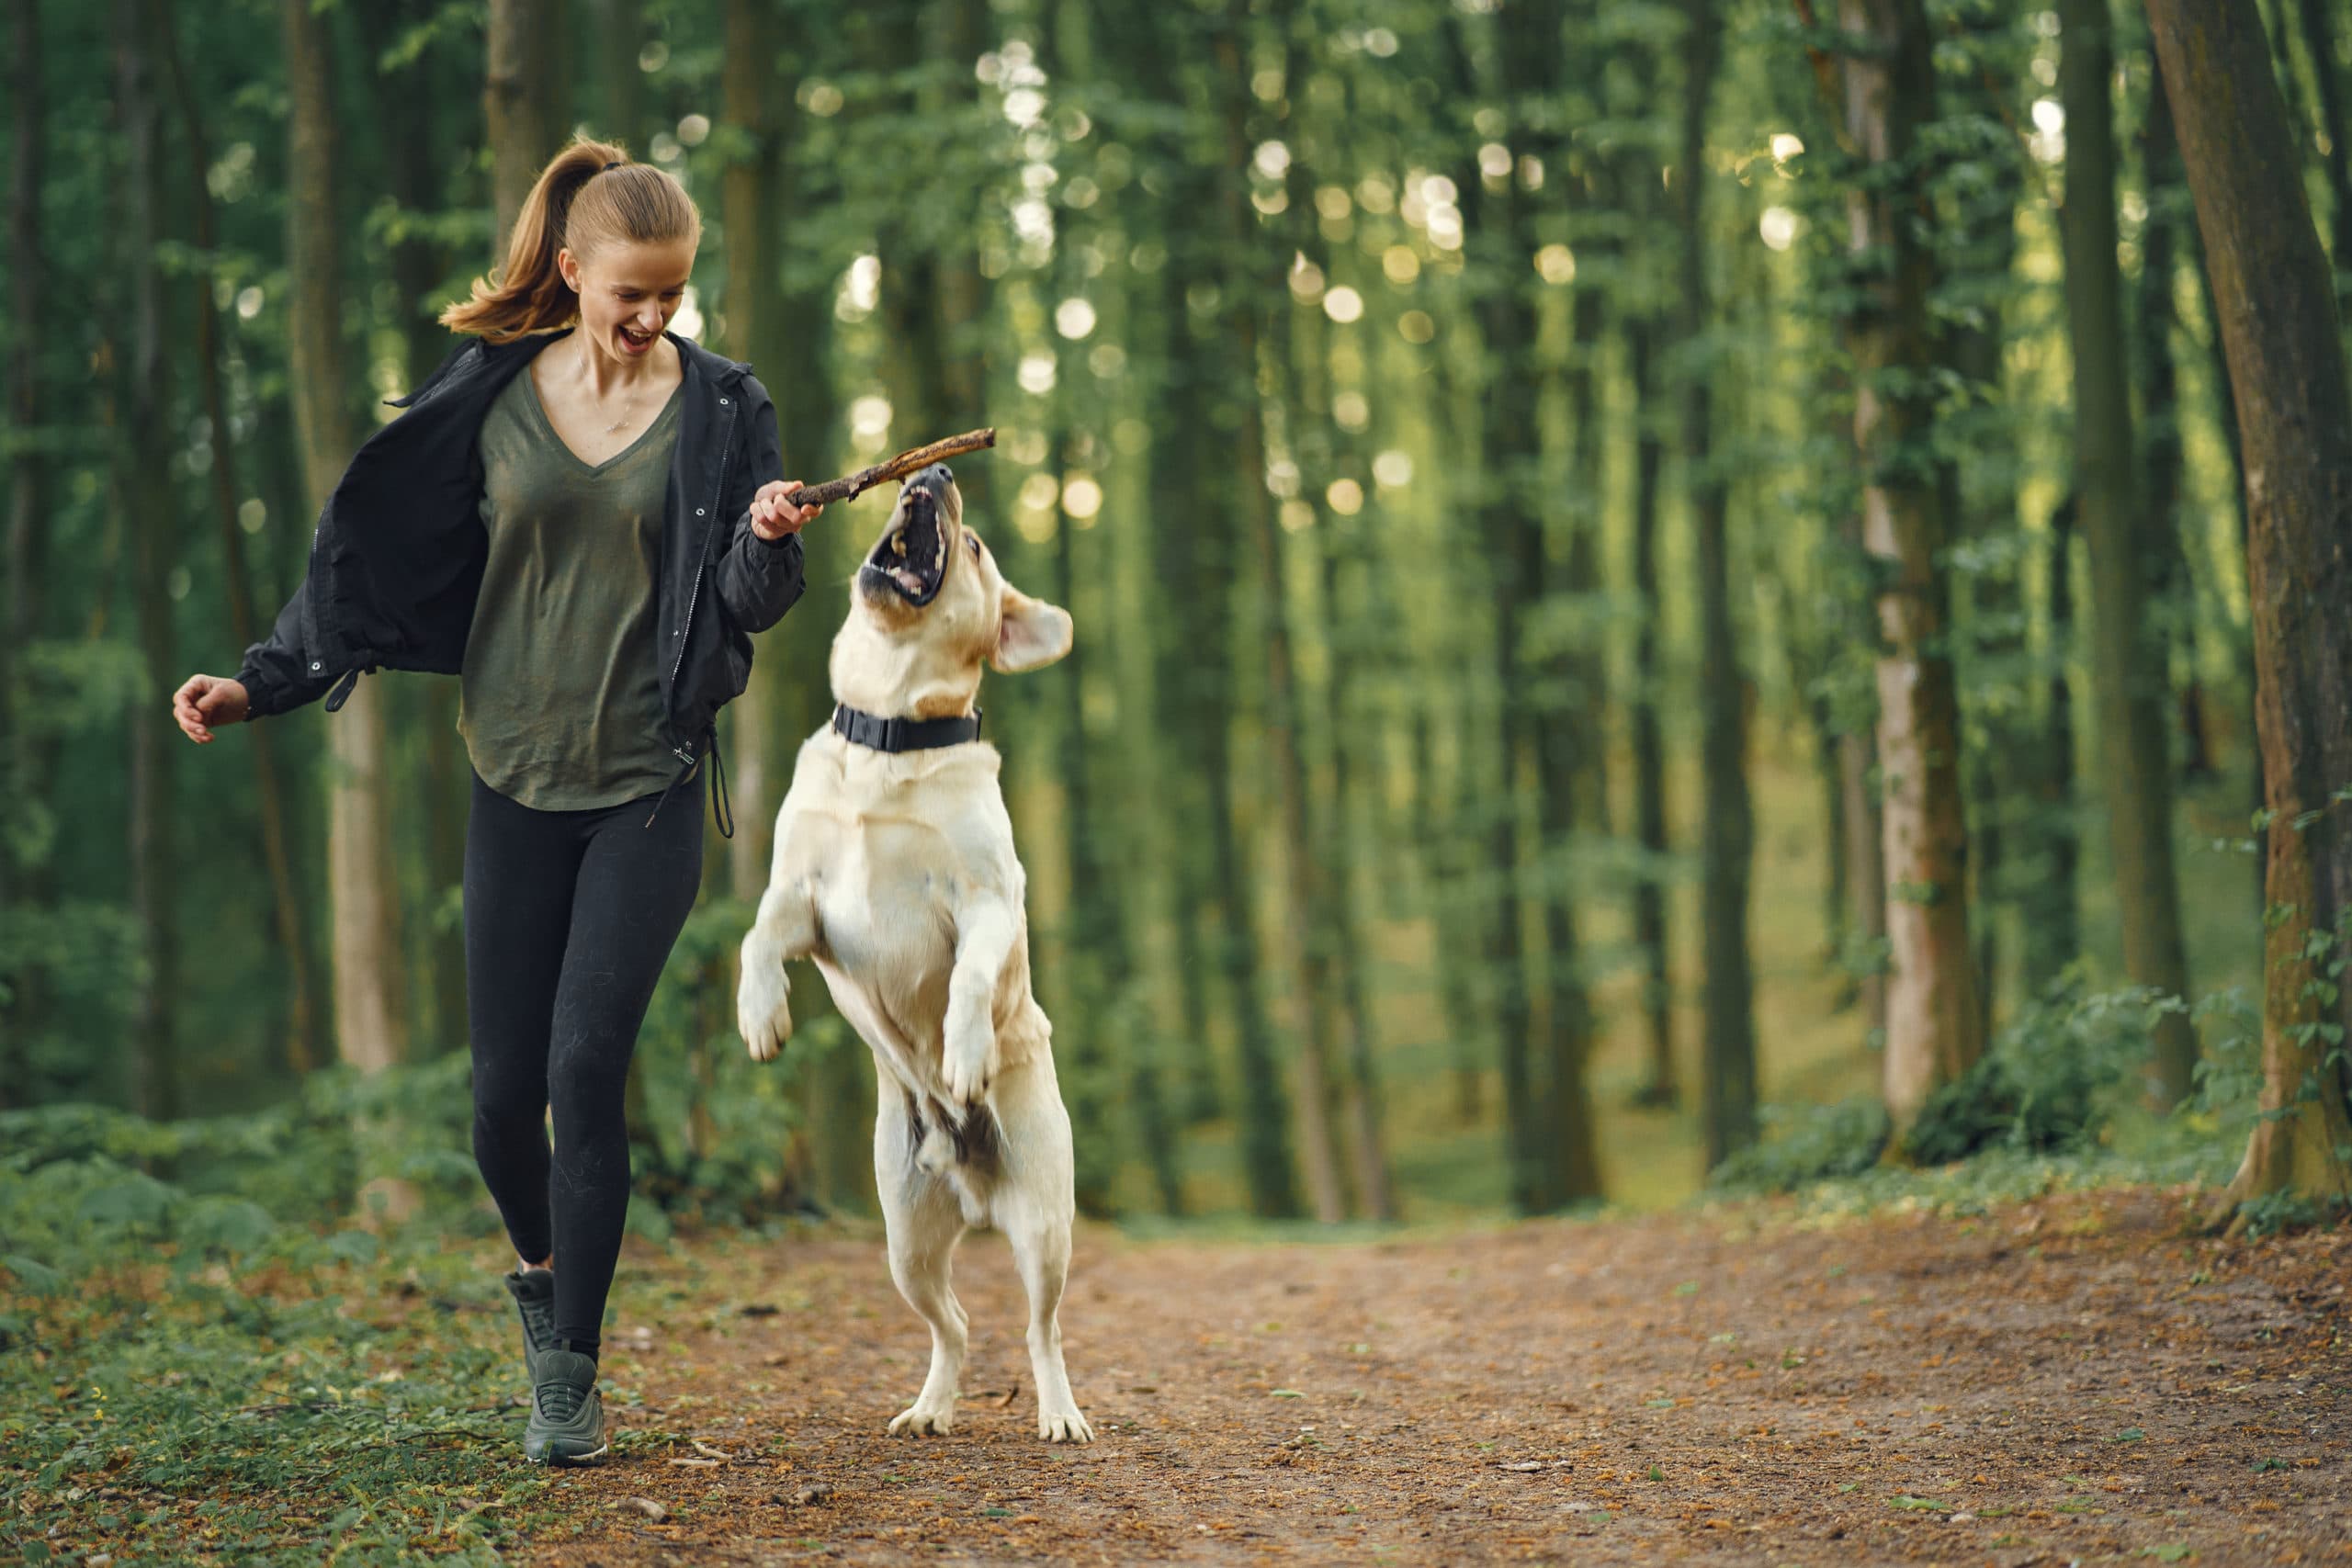 How To Train Your Dog To Walk Beside You Without a Leash